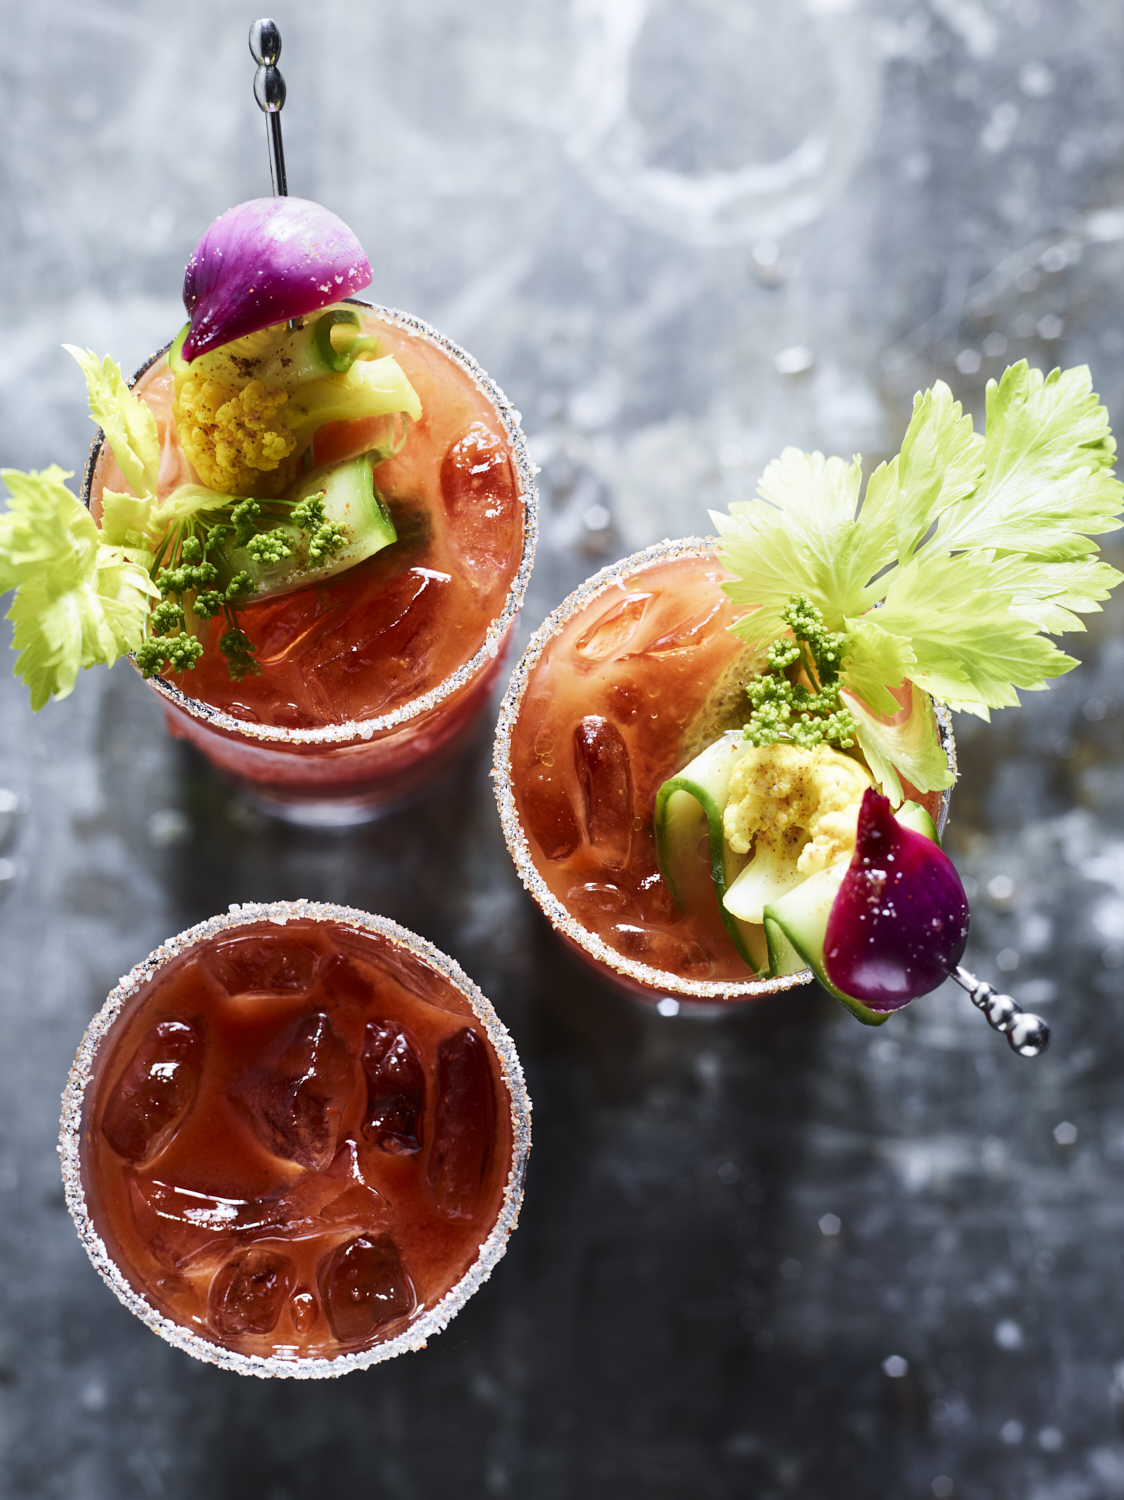 4 Easy Tips For Creating The Best Bloody Mary Bar At Your Next Tailgate Williams Sonoma Taste,Severe Macaw Vs Blue And Gold